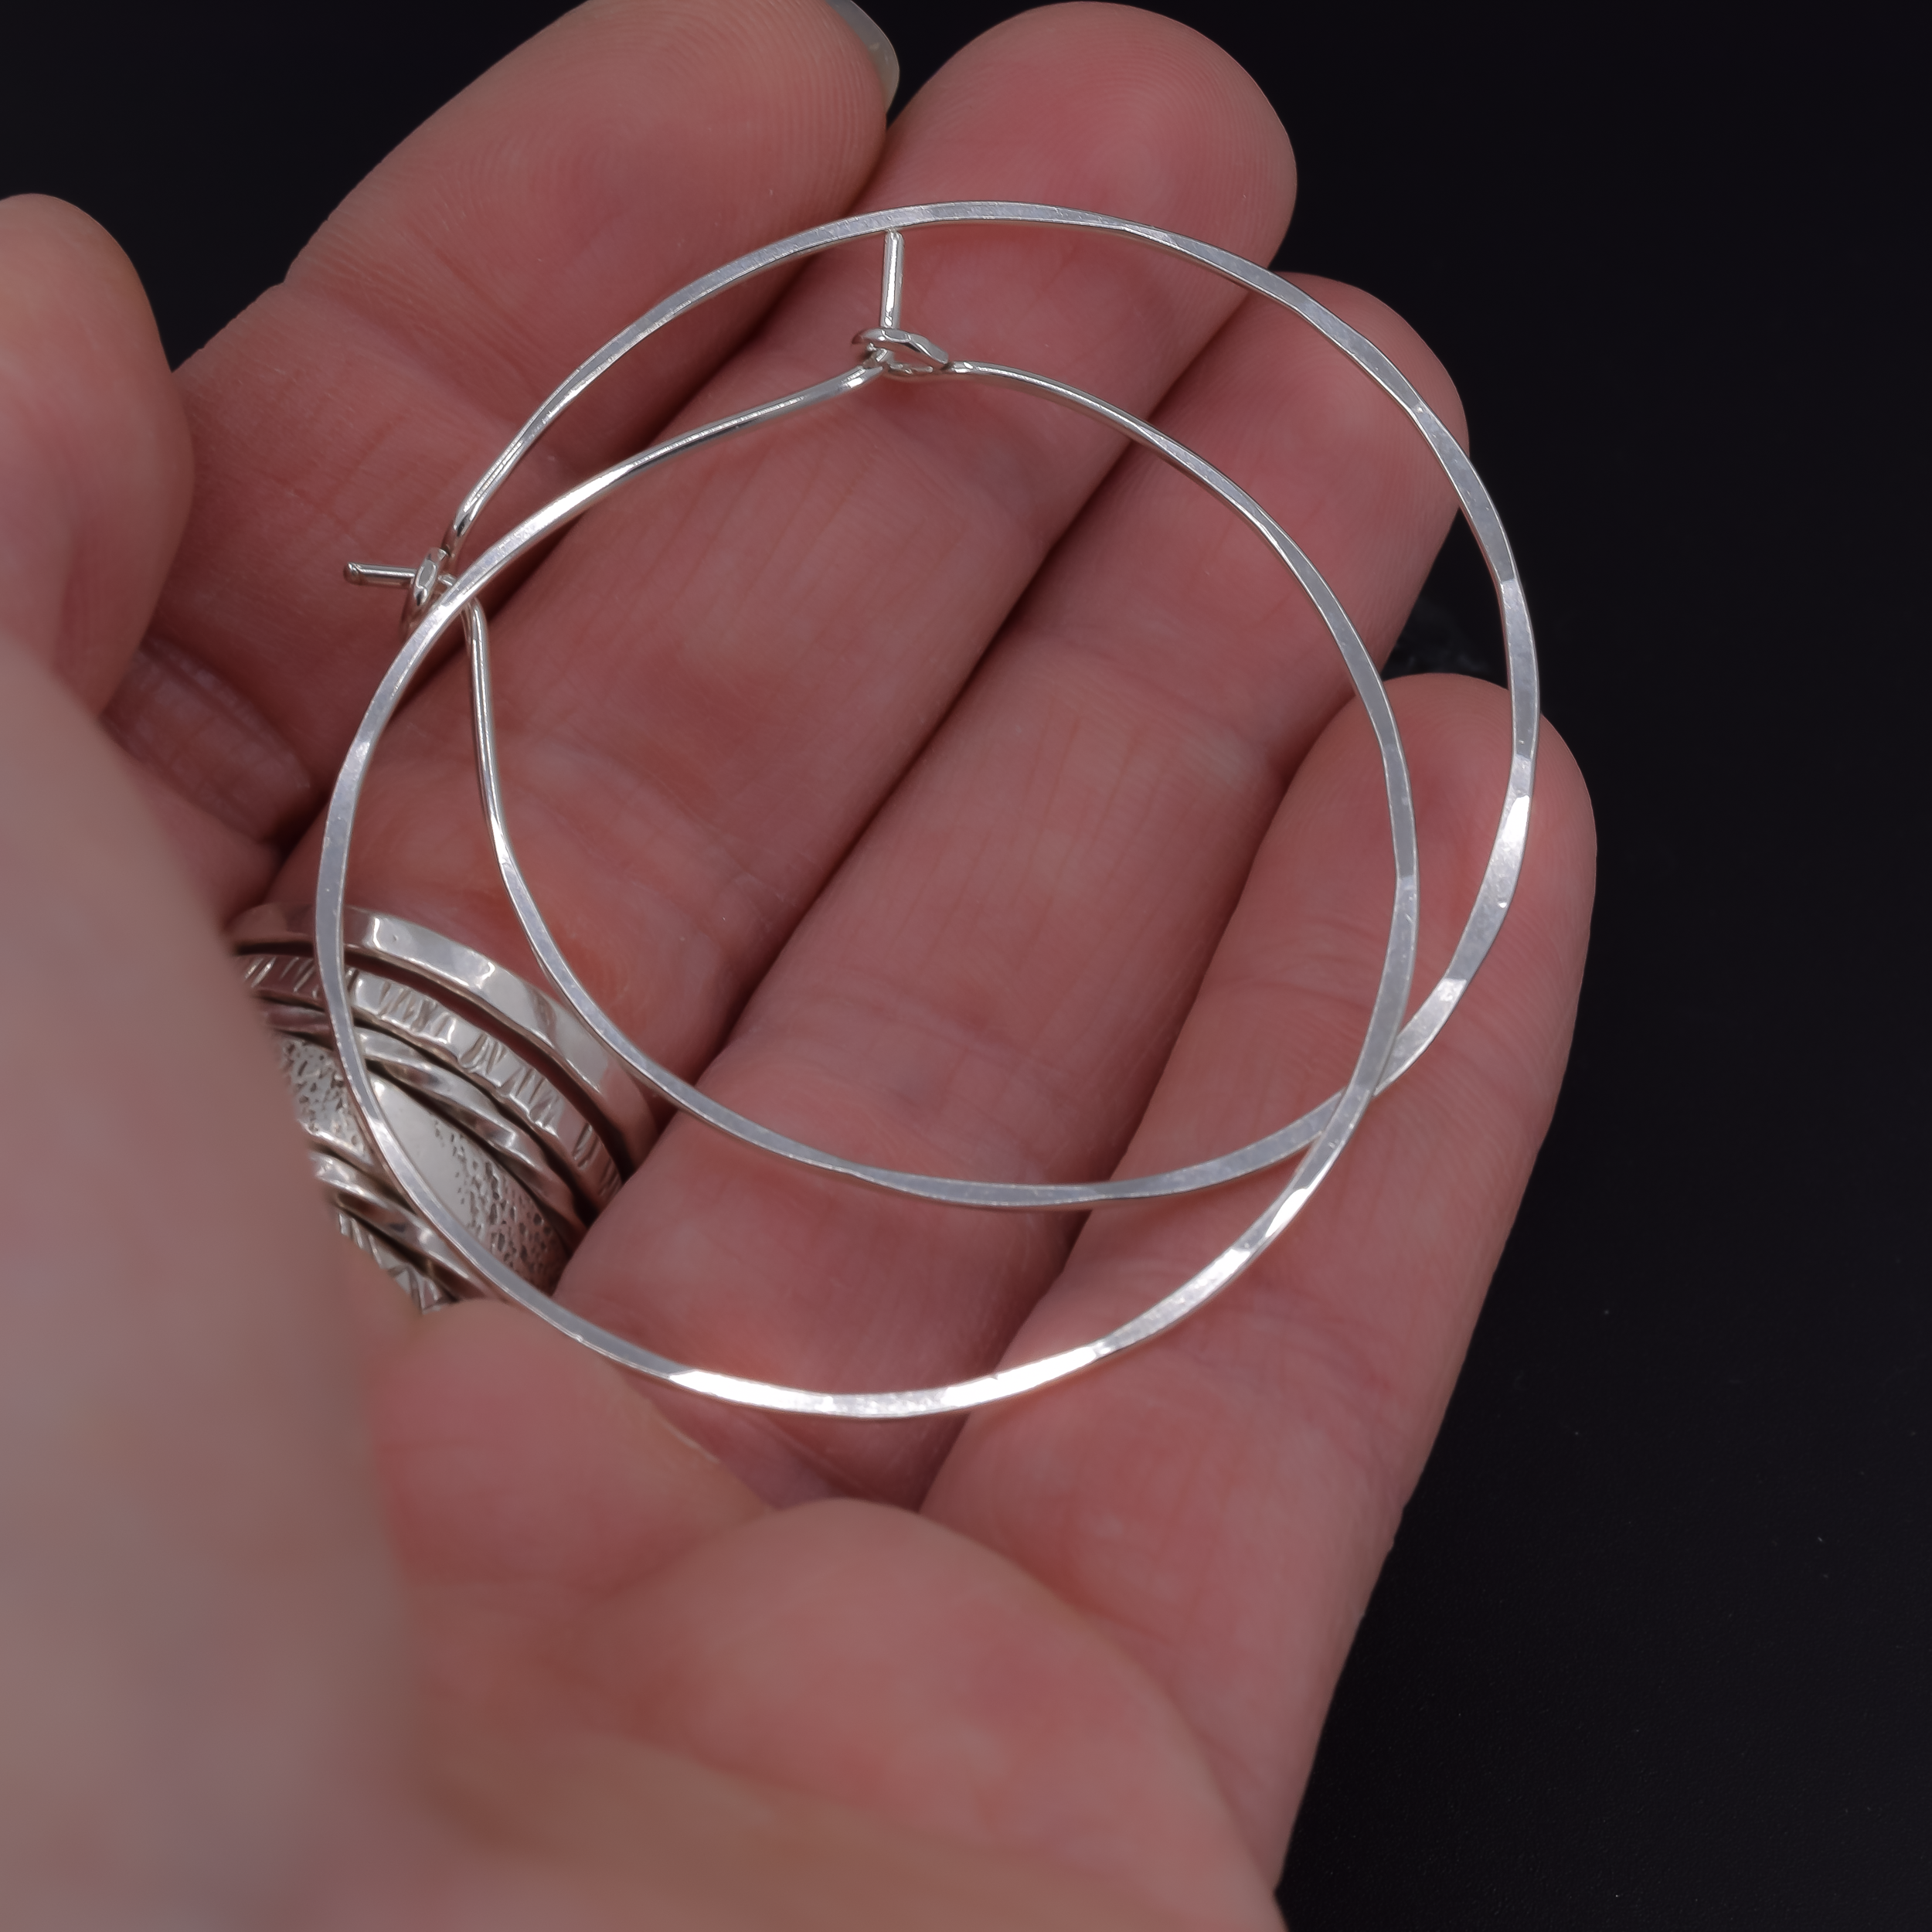 Extra large 2 inch sterling silver hoop earrings shown in hand